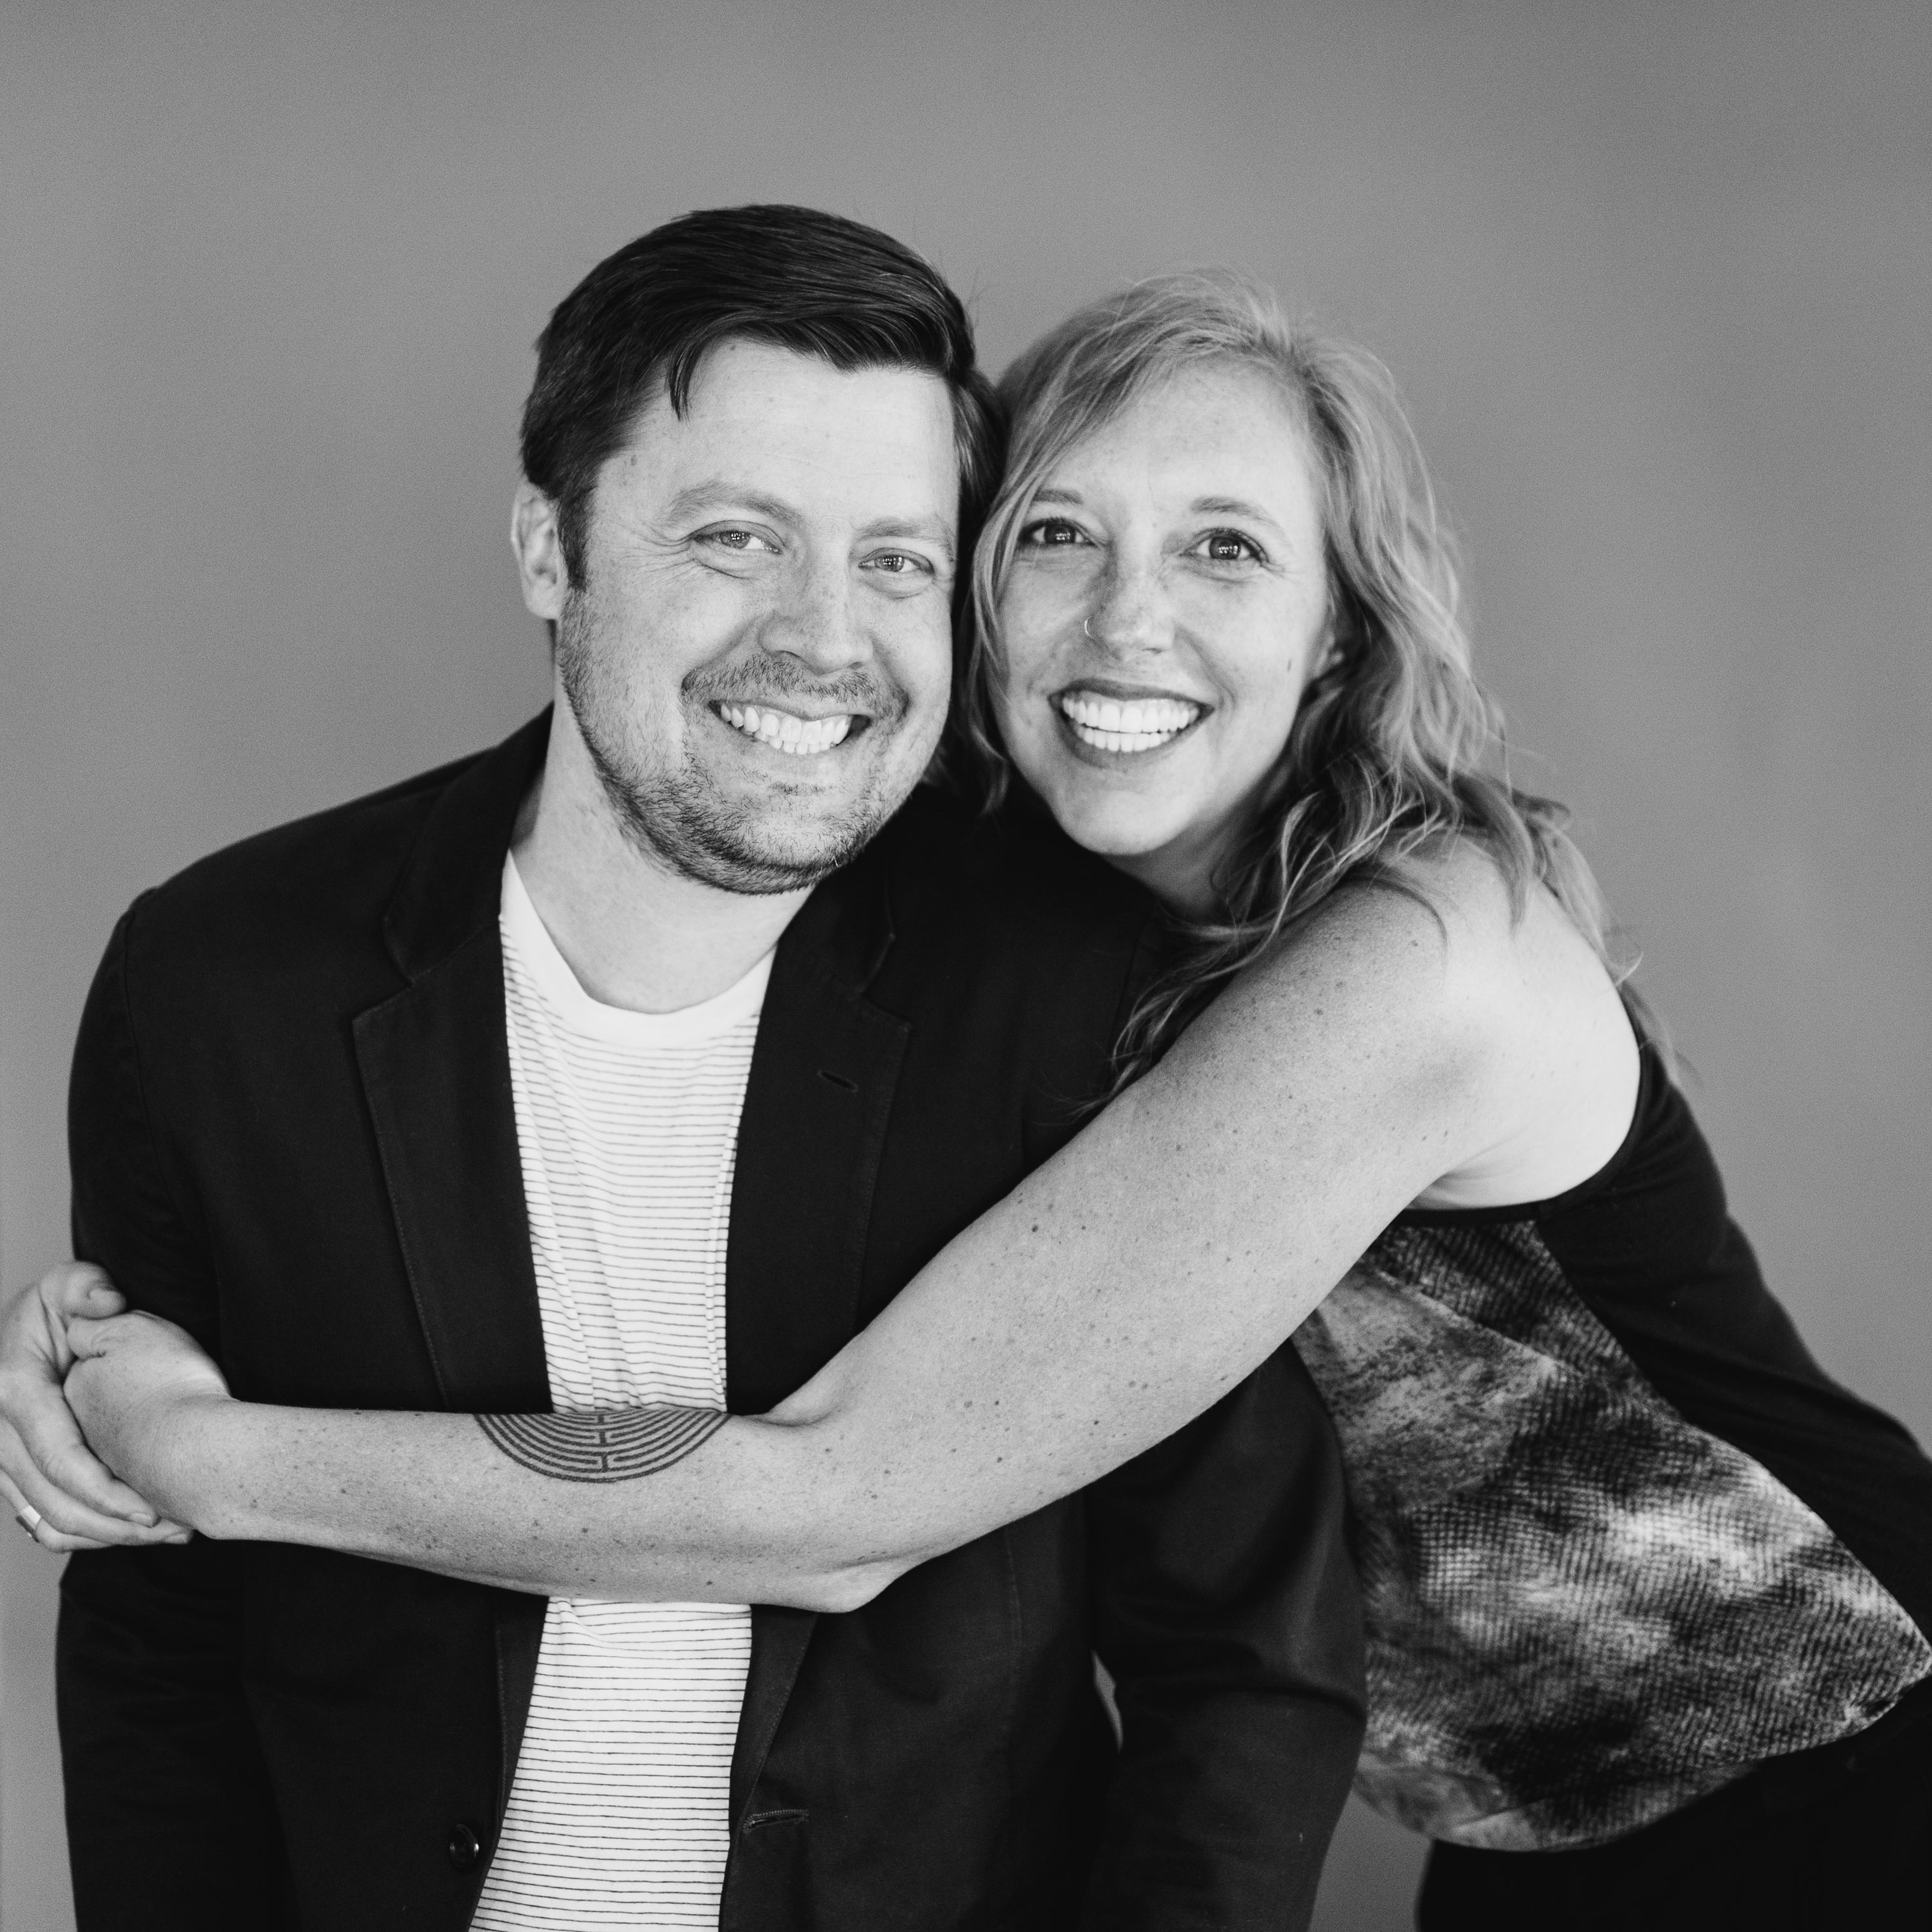 smiling couple in their early 30's, caucasian, both smiling broadly, taken in black & white. entrepreneur marriage